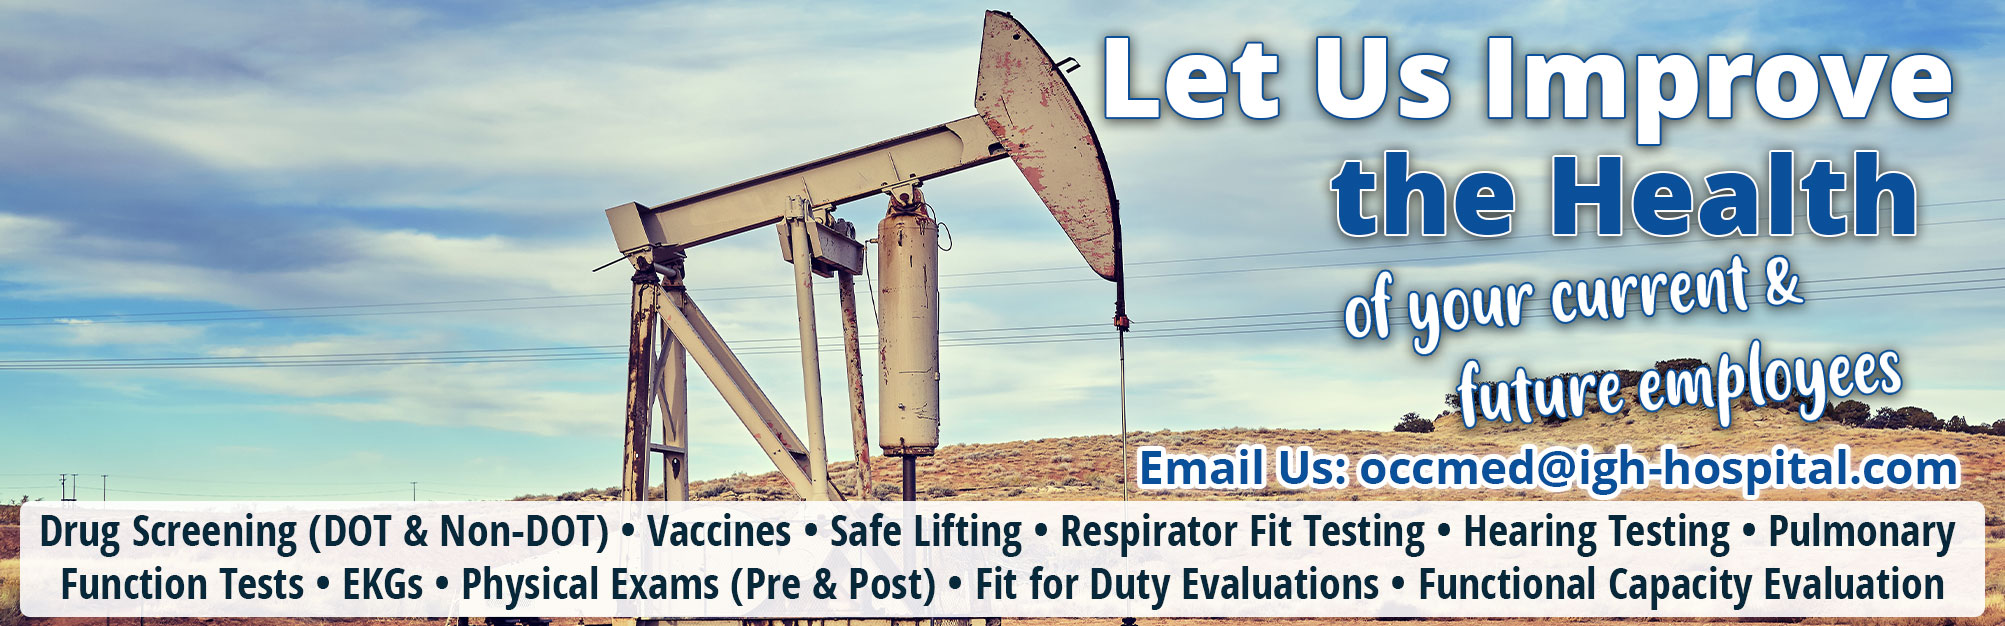 Let Us Improve the Health of your current & future employees

Drug Screening DOT & Non-DOT Vaccines ,Safe Lifting, Respirator Fit Testing, Hearing Testing, Pulmonary Function Tests, EKGs, Physical Exams Pre & Post,  Fit for Duty Evaluations , Functional Capacity Evaluation 

Contact Jason Rybolt @ 432-639-3430 or Email: occmed@igh-hospital.com